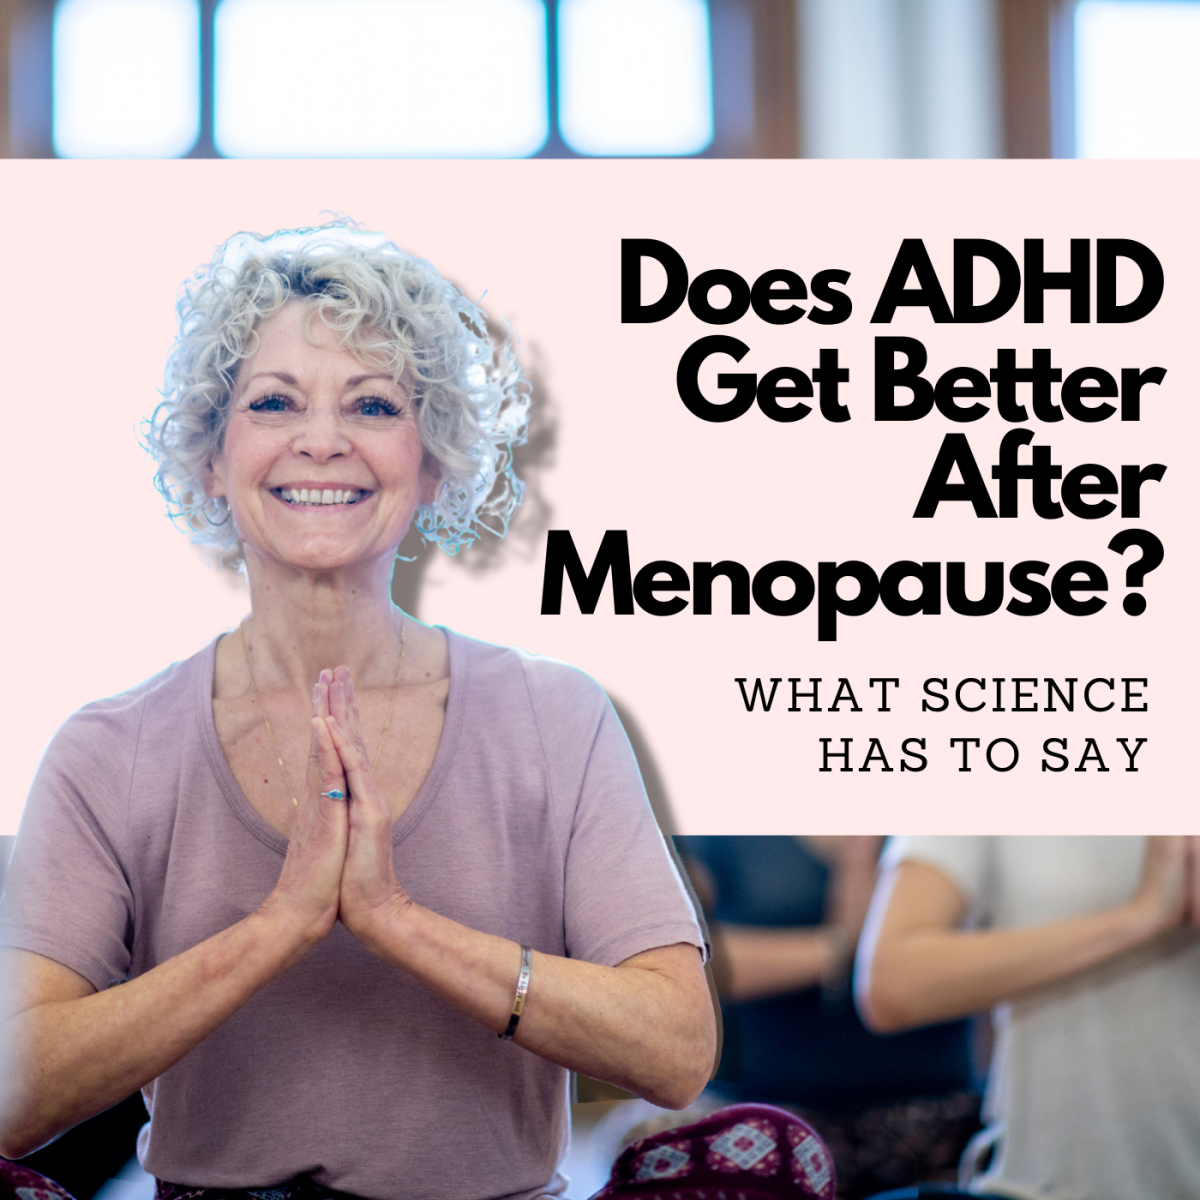 Does ADHD get better after menopause? Read on to learn more